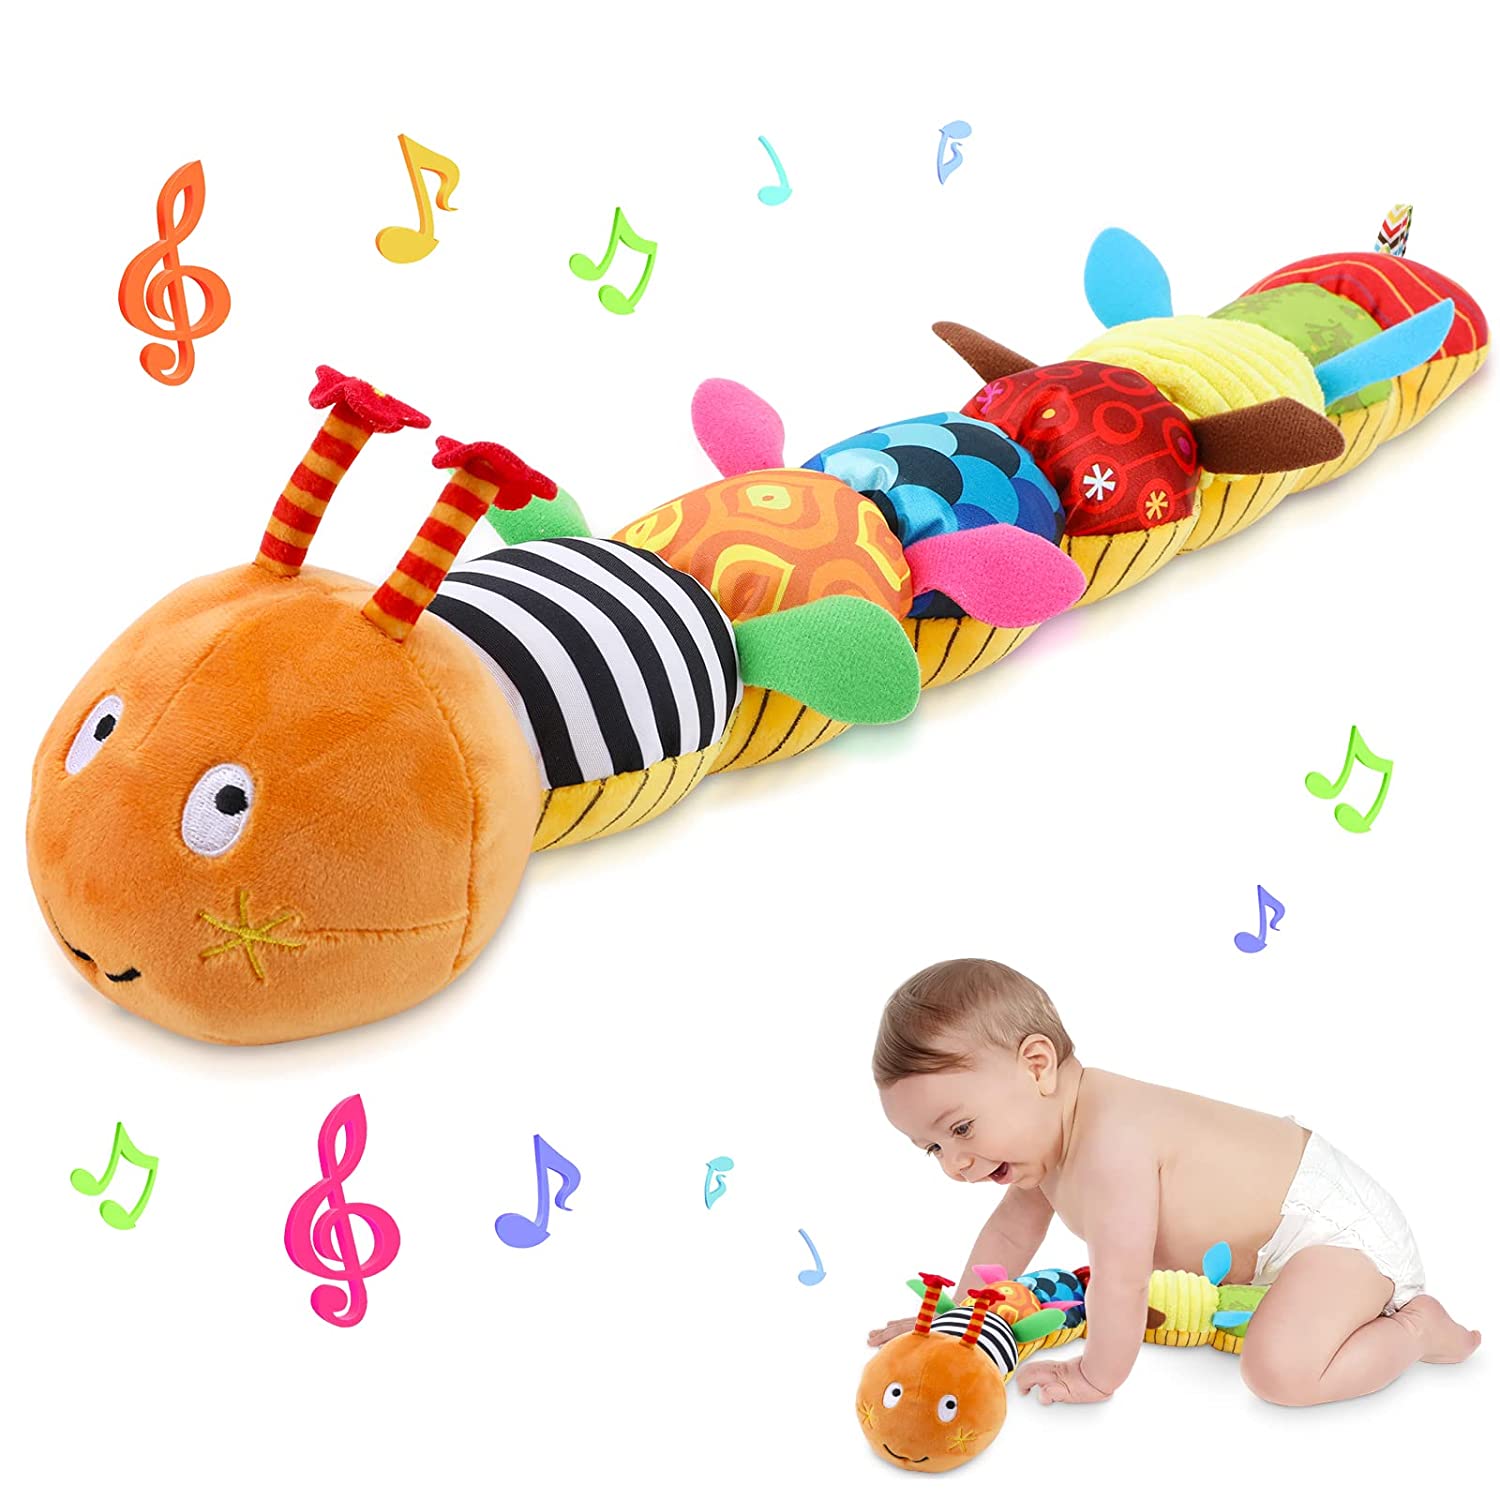 Thriving Toys Baby Musical Caterpillar Stuffed Animal Toys, Infant Soft Plush Toy with Multi-Sensory Crinkle, Rattle&Textures for Babies Newborn Children Gift